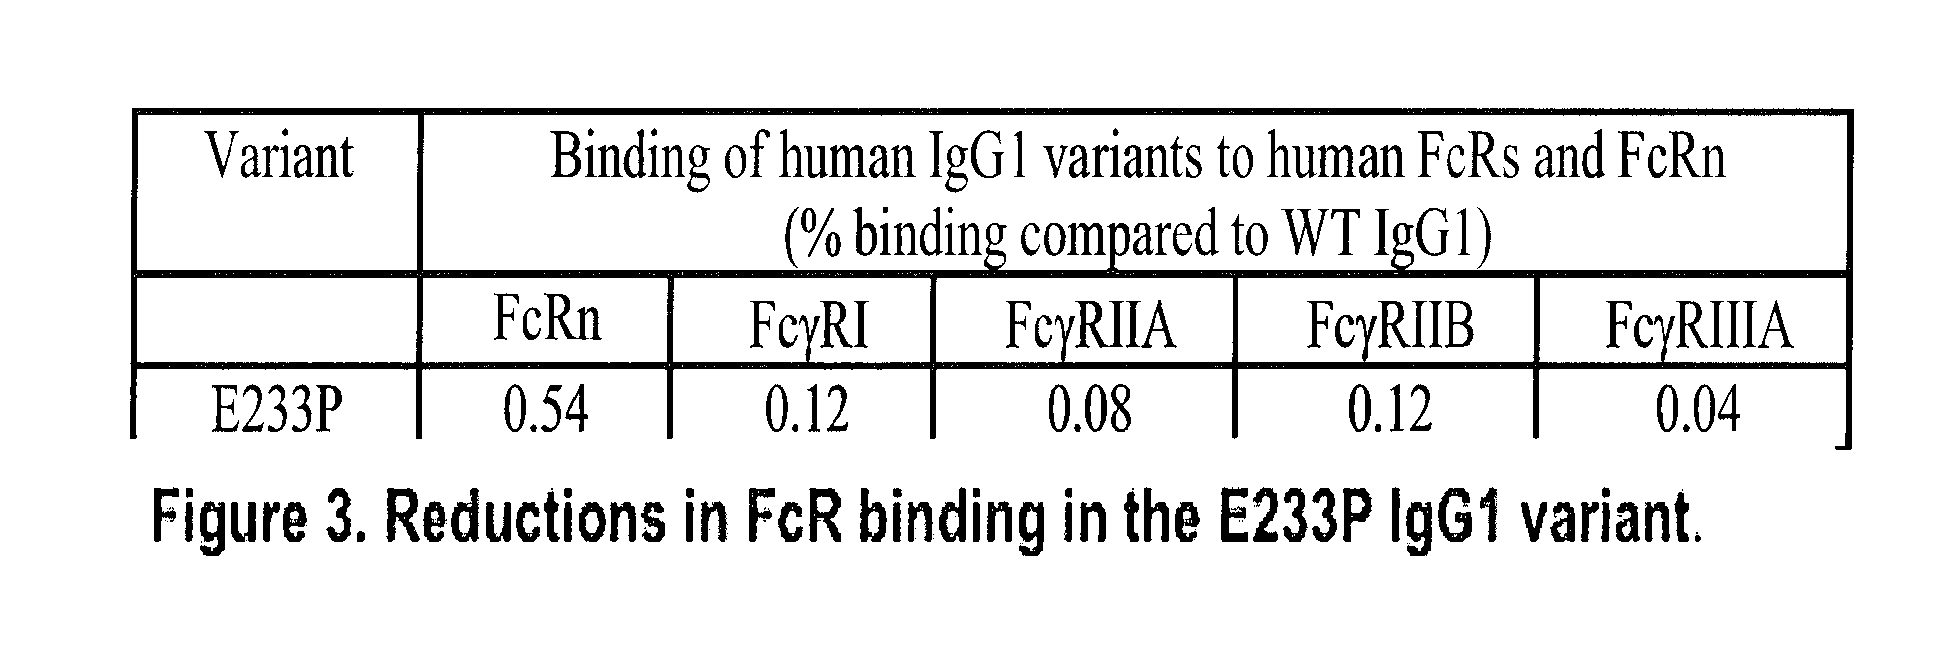 ANTI-CD154 ANTIBODIES HAVING IMPAIRED FcR BINDING AND/OR COMPLEMENT BINDING PROPERTIES AND RELATED THERAPIES